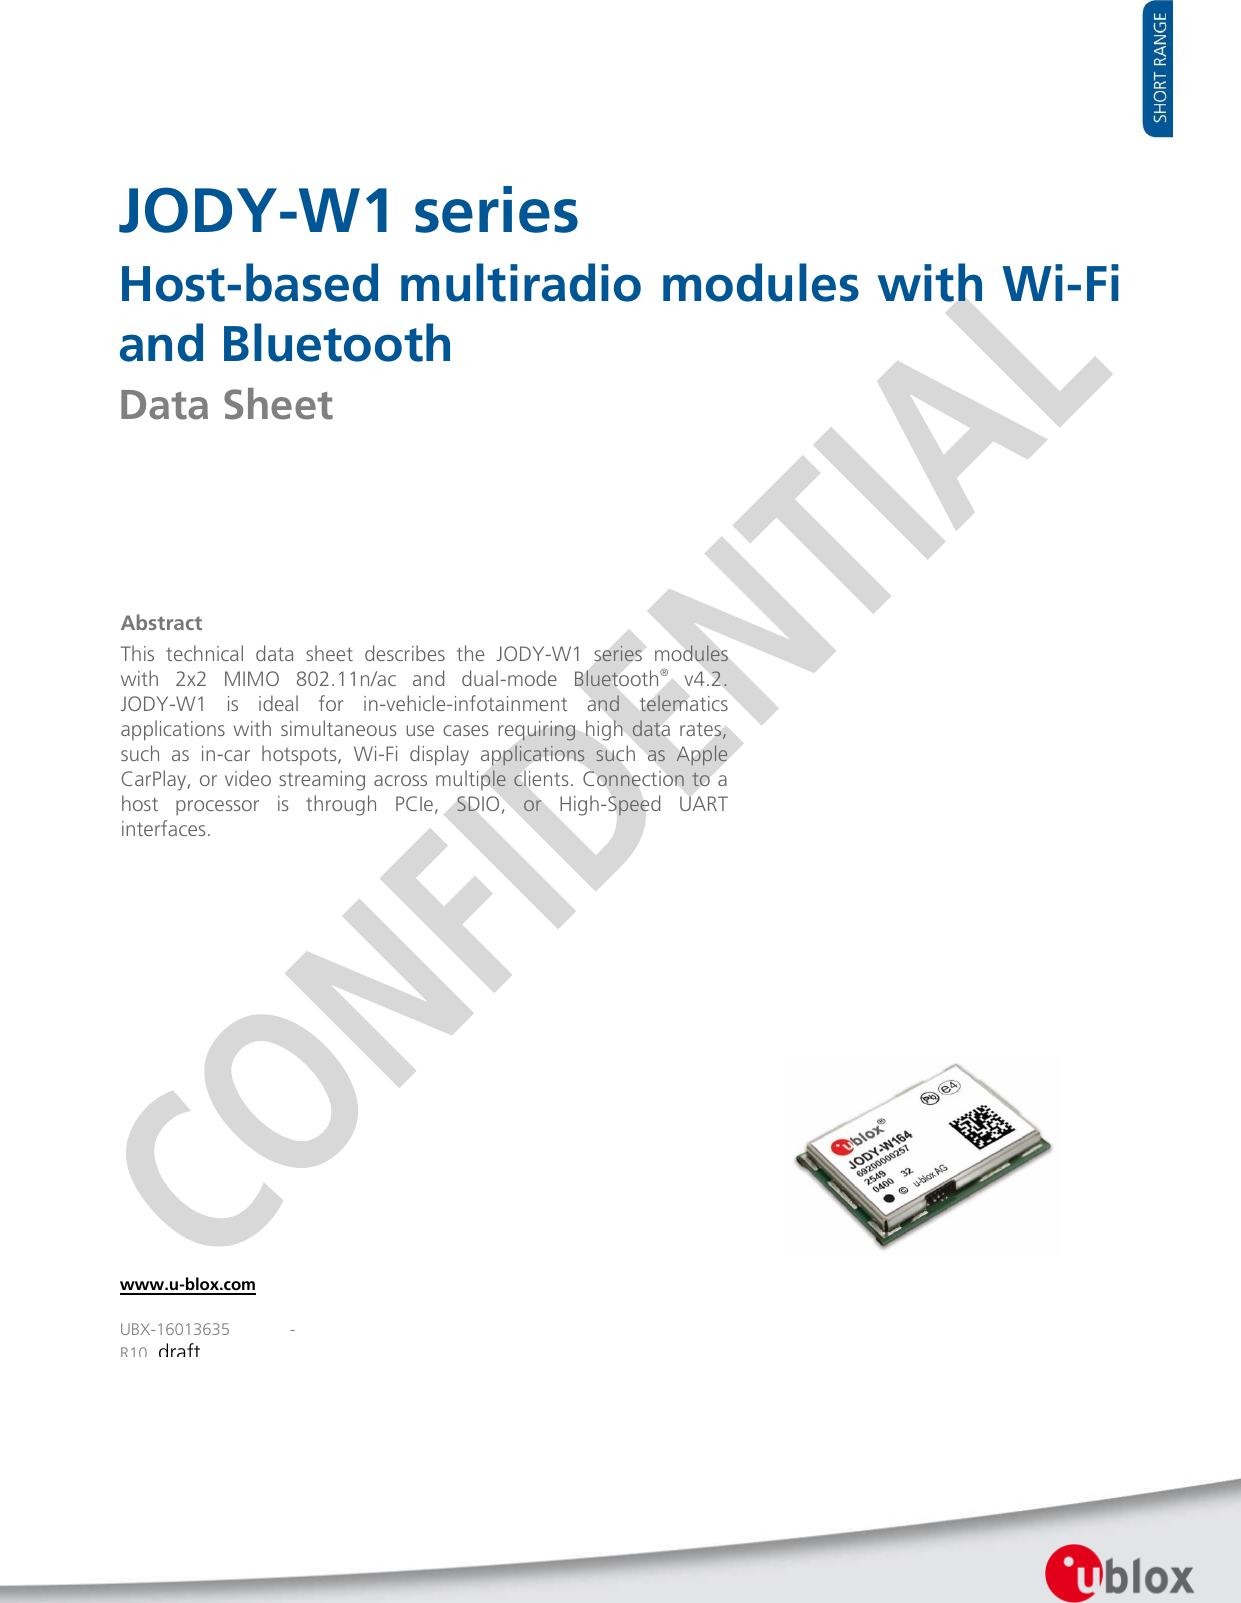    JODY-W1 series Host-based multiradio modules with Wi-Fi and Bluetooth Data Sheet                   Abstract This  technical  data  sheet  describes  the  JODY-W1  series  modules with  2x2  MIMO  802.11n/ac  and  dual-mode  Bluetooth®  v4.2.  JODY-W1  is  ideal  for  in-vehicle-infotainment  and  telematics applications with simultaneous use cases requiring high data rates, such  as  in-car  hotspots,  Wi-Fi  display  applications  such  as  Apple CarPlay, or video streaming across multiple clients. Connection to a host  processor  is  through  PCIe,  SDIO,  or  High-Speed  UART interfaces.   www.u-blox.com UBX-16013635  - R10_draft 